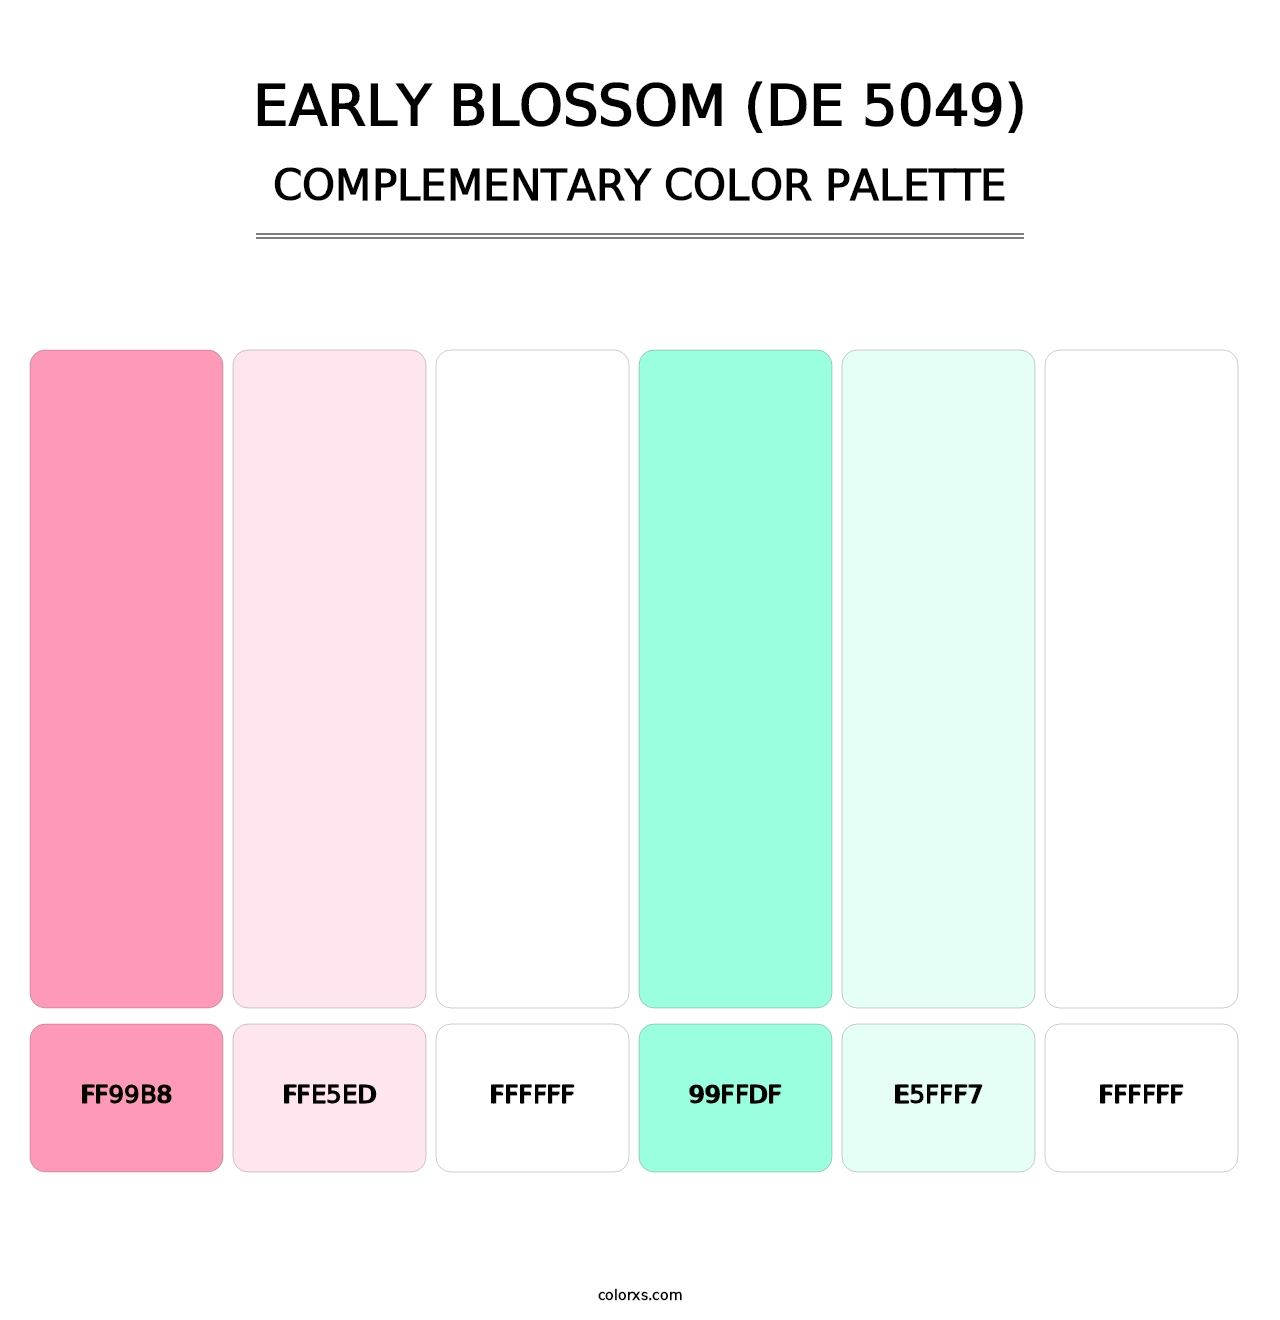 Early Blossom (DE 5049) - Complementary Color Palette